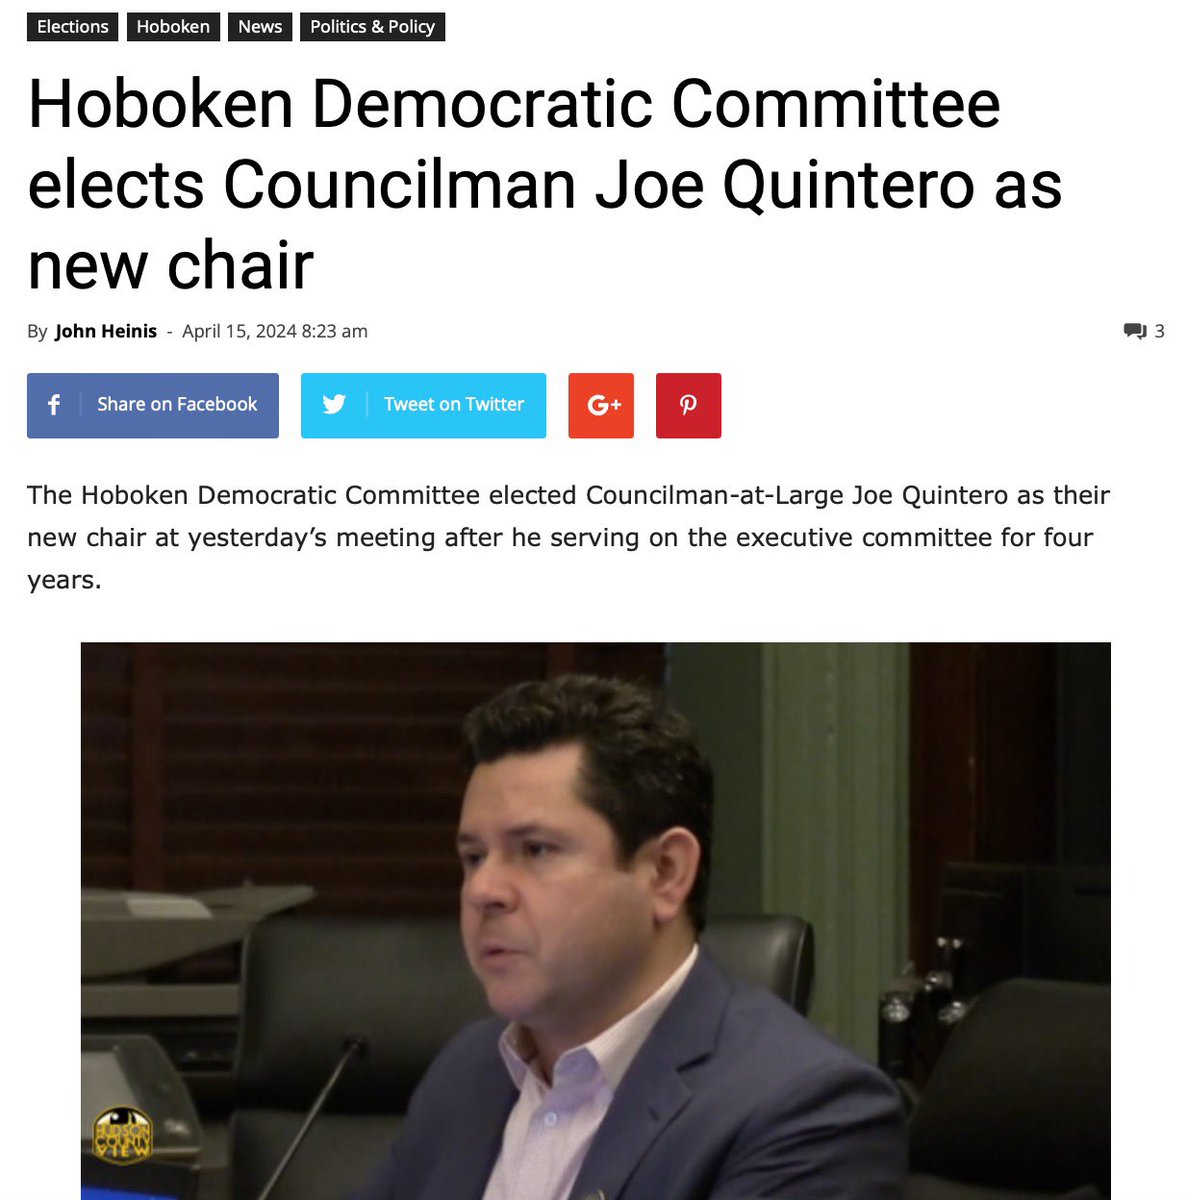 Congratulations to my friend @JoeQEsq for being named the new Chair of @hobokendems. Looking forward to working with you to elect strong Democrats and deliver big progress for our city.